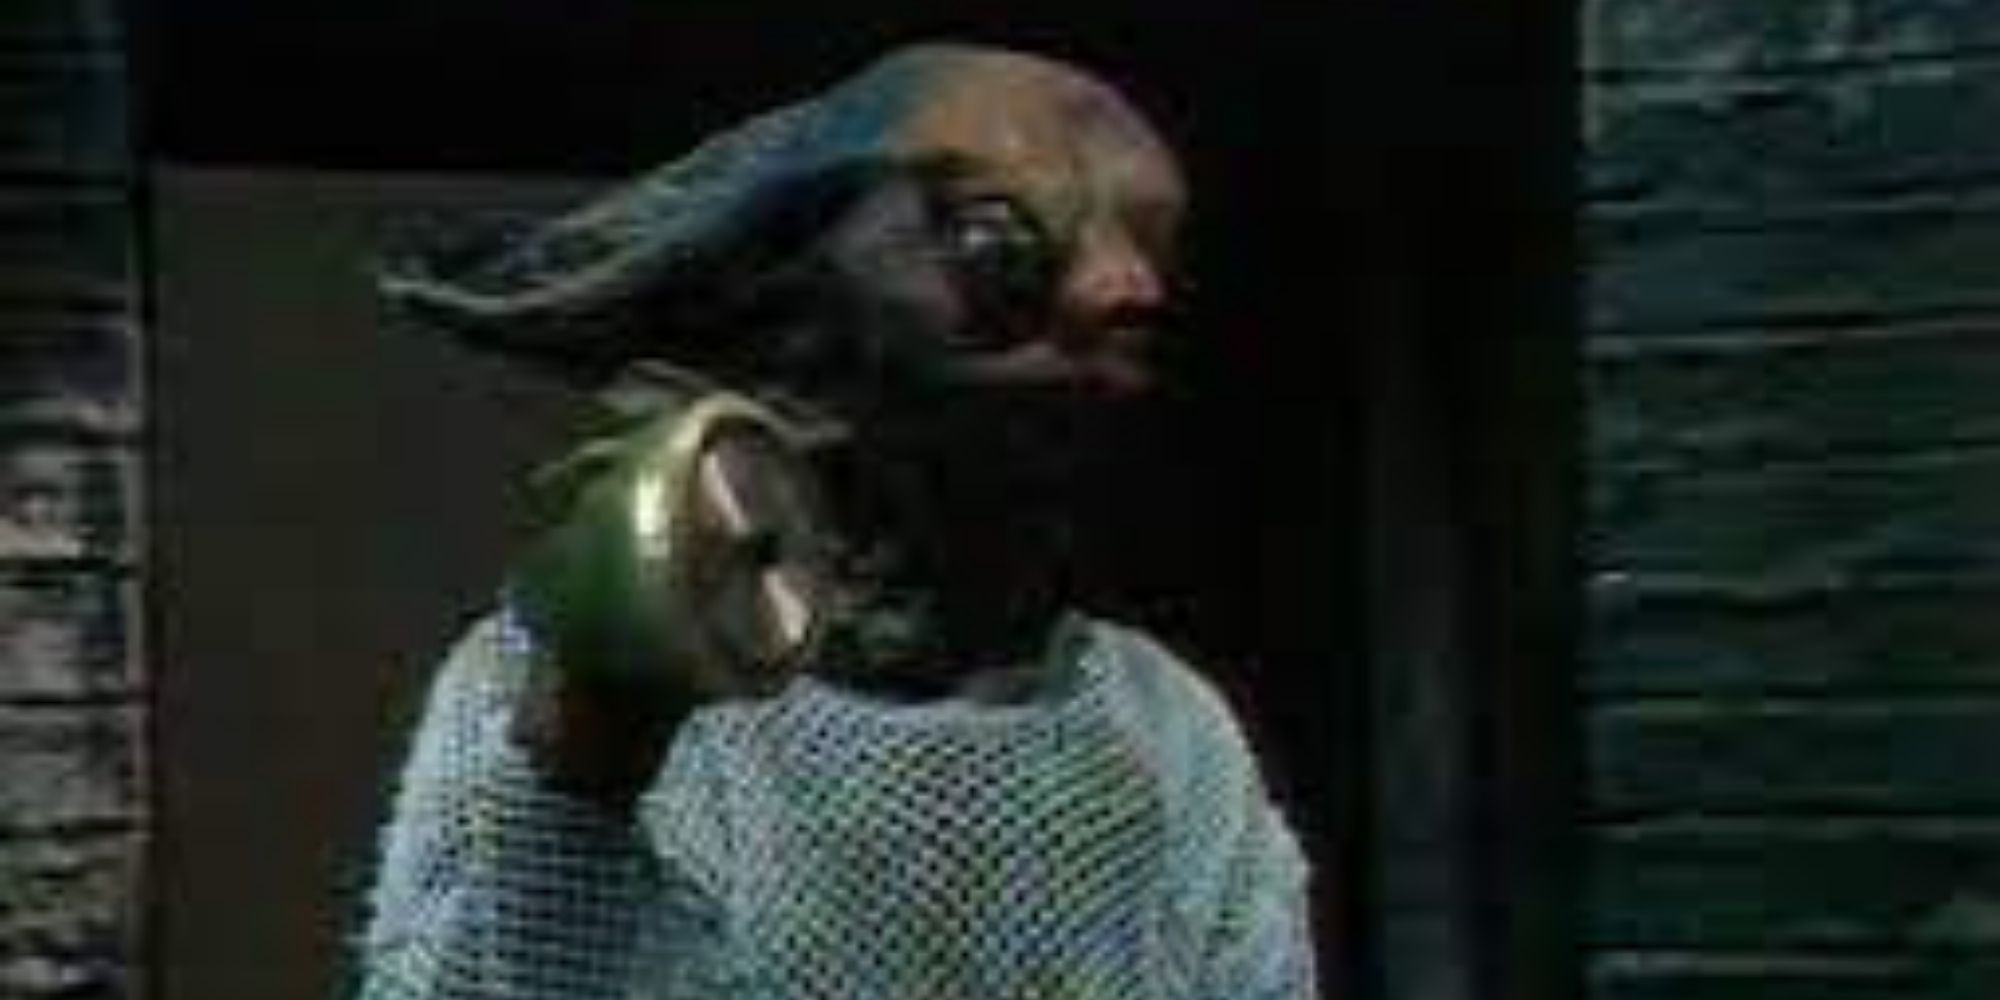 Official image of the Sea Devils, an alien from the TV show Doctor Who.